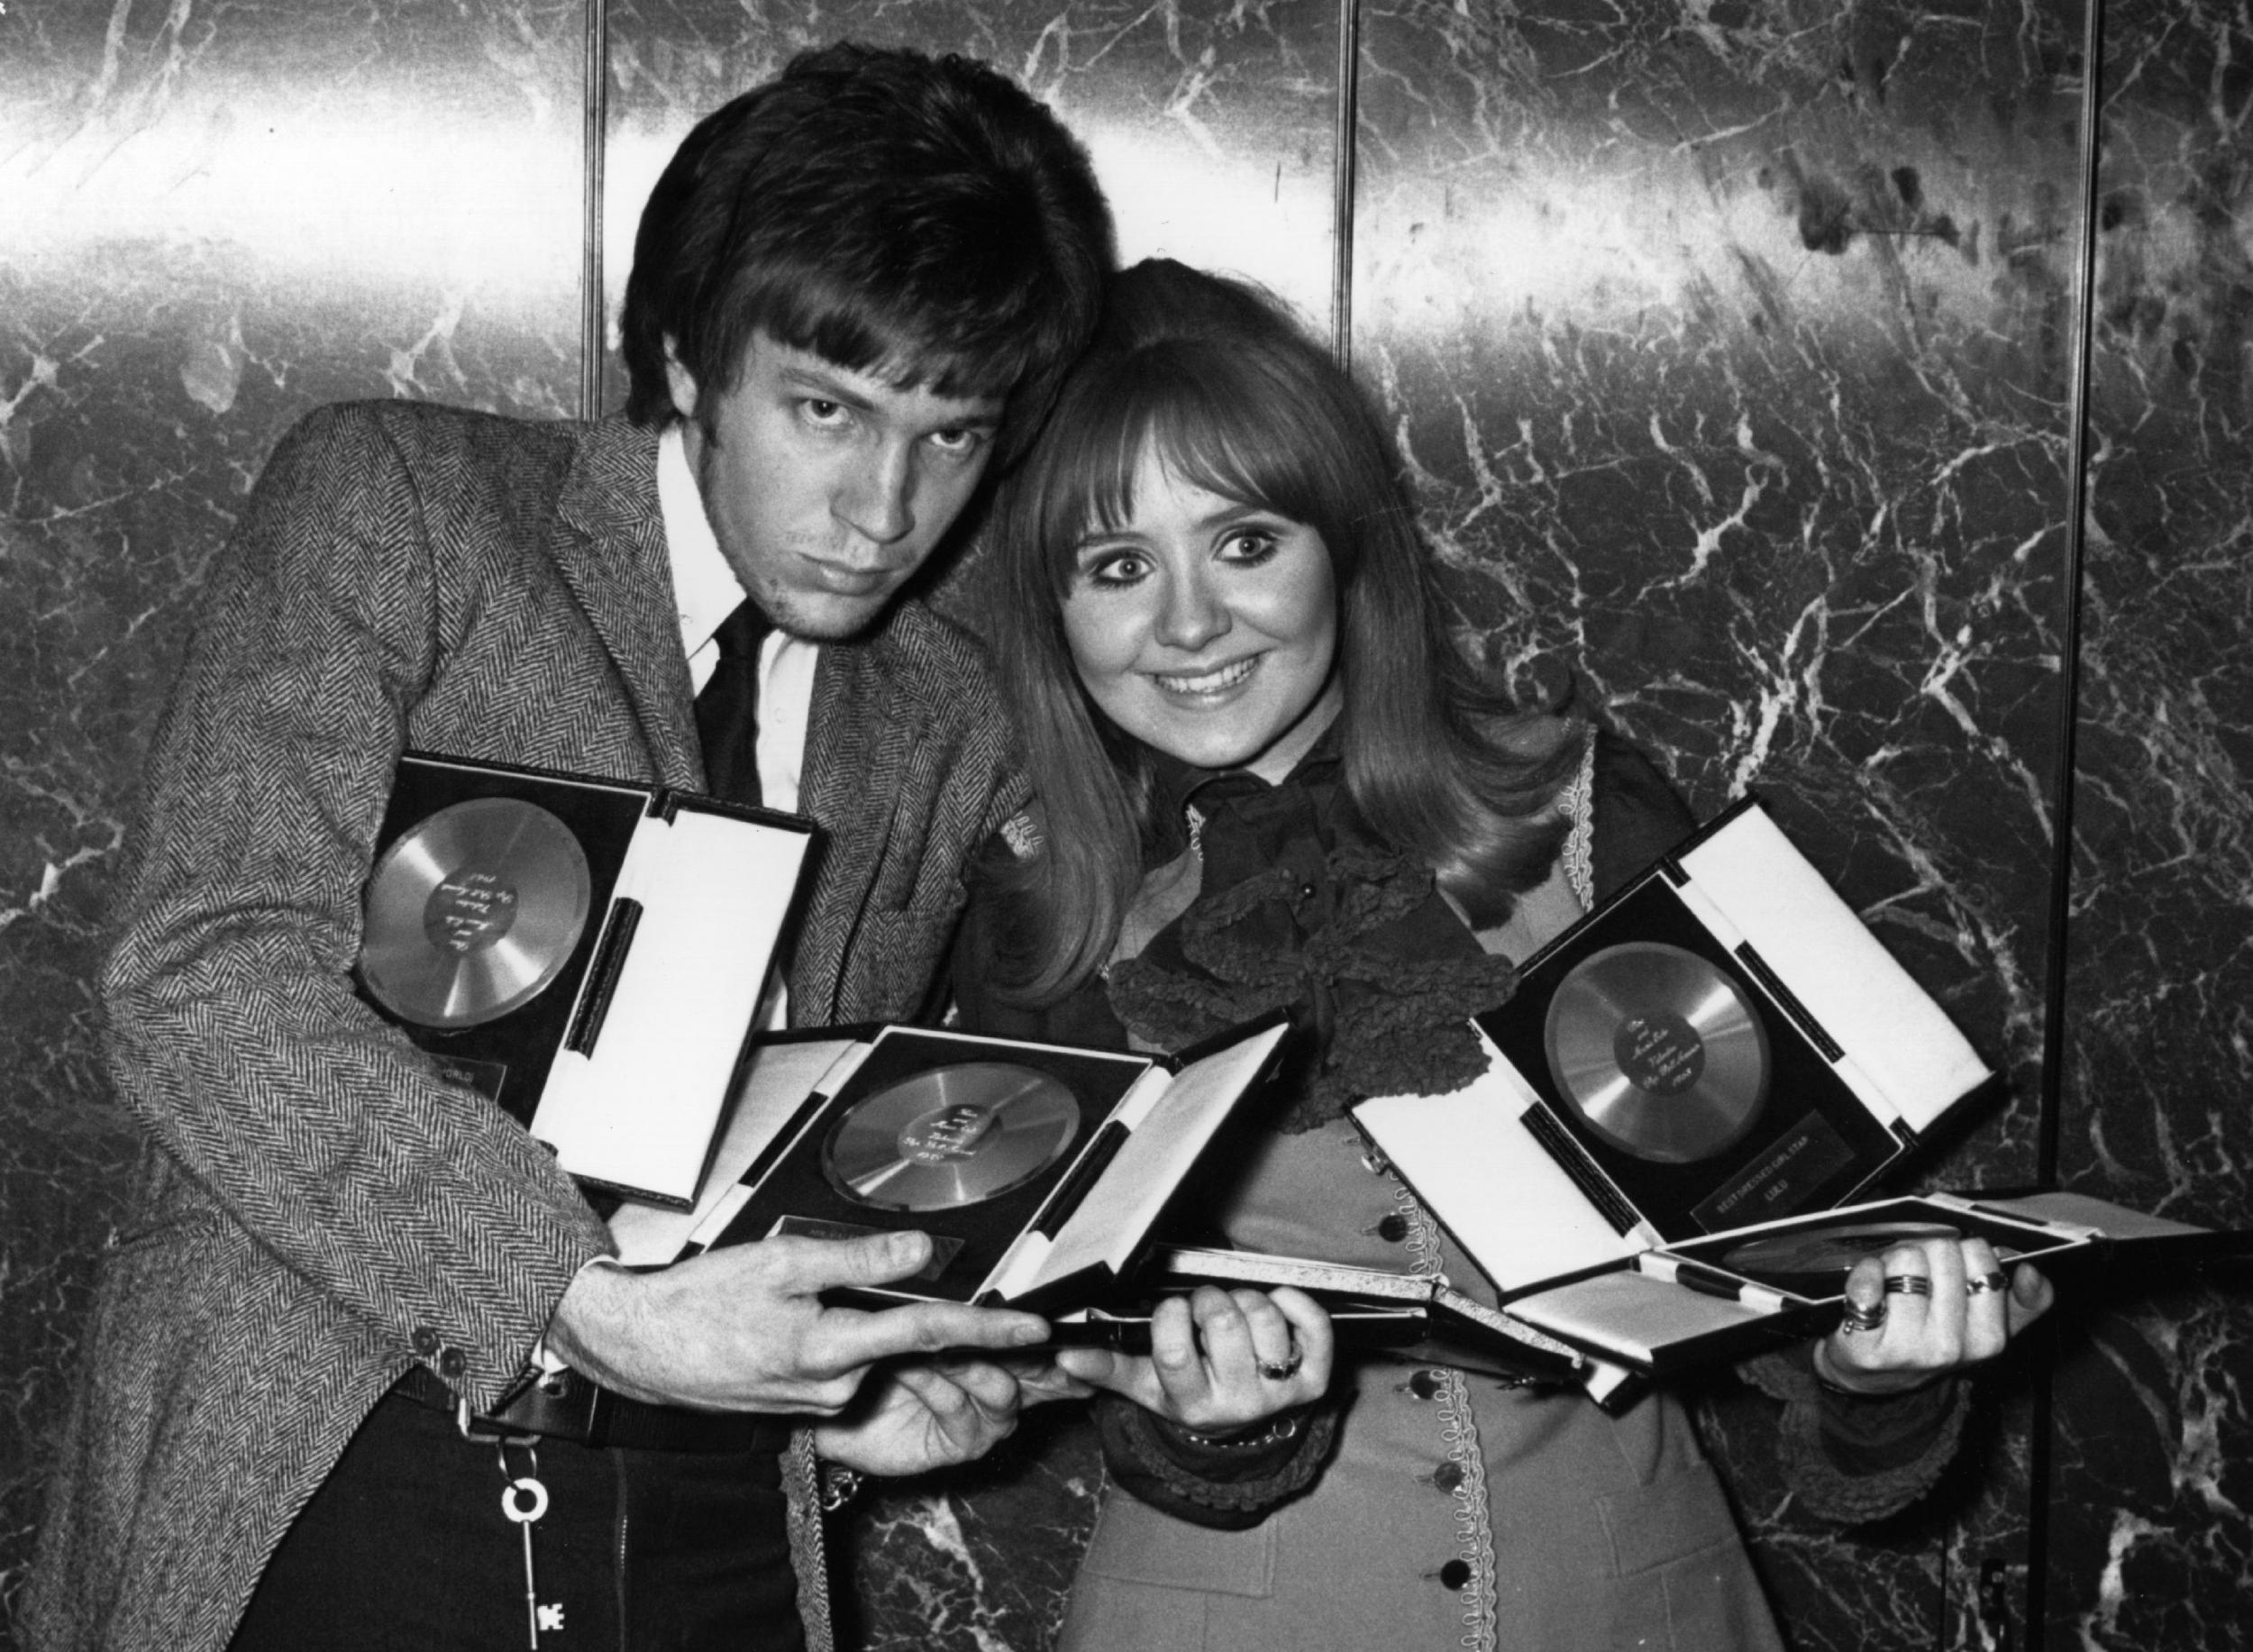 With Lulu following an awards ceremony in 1968